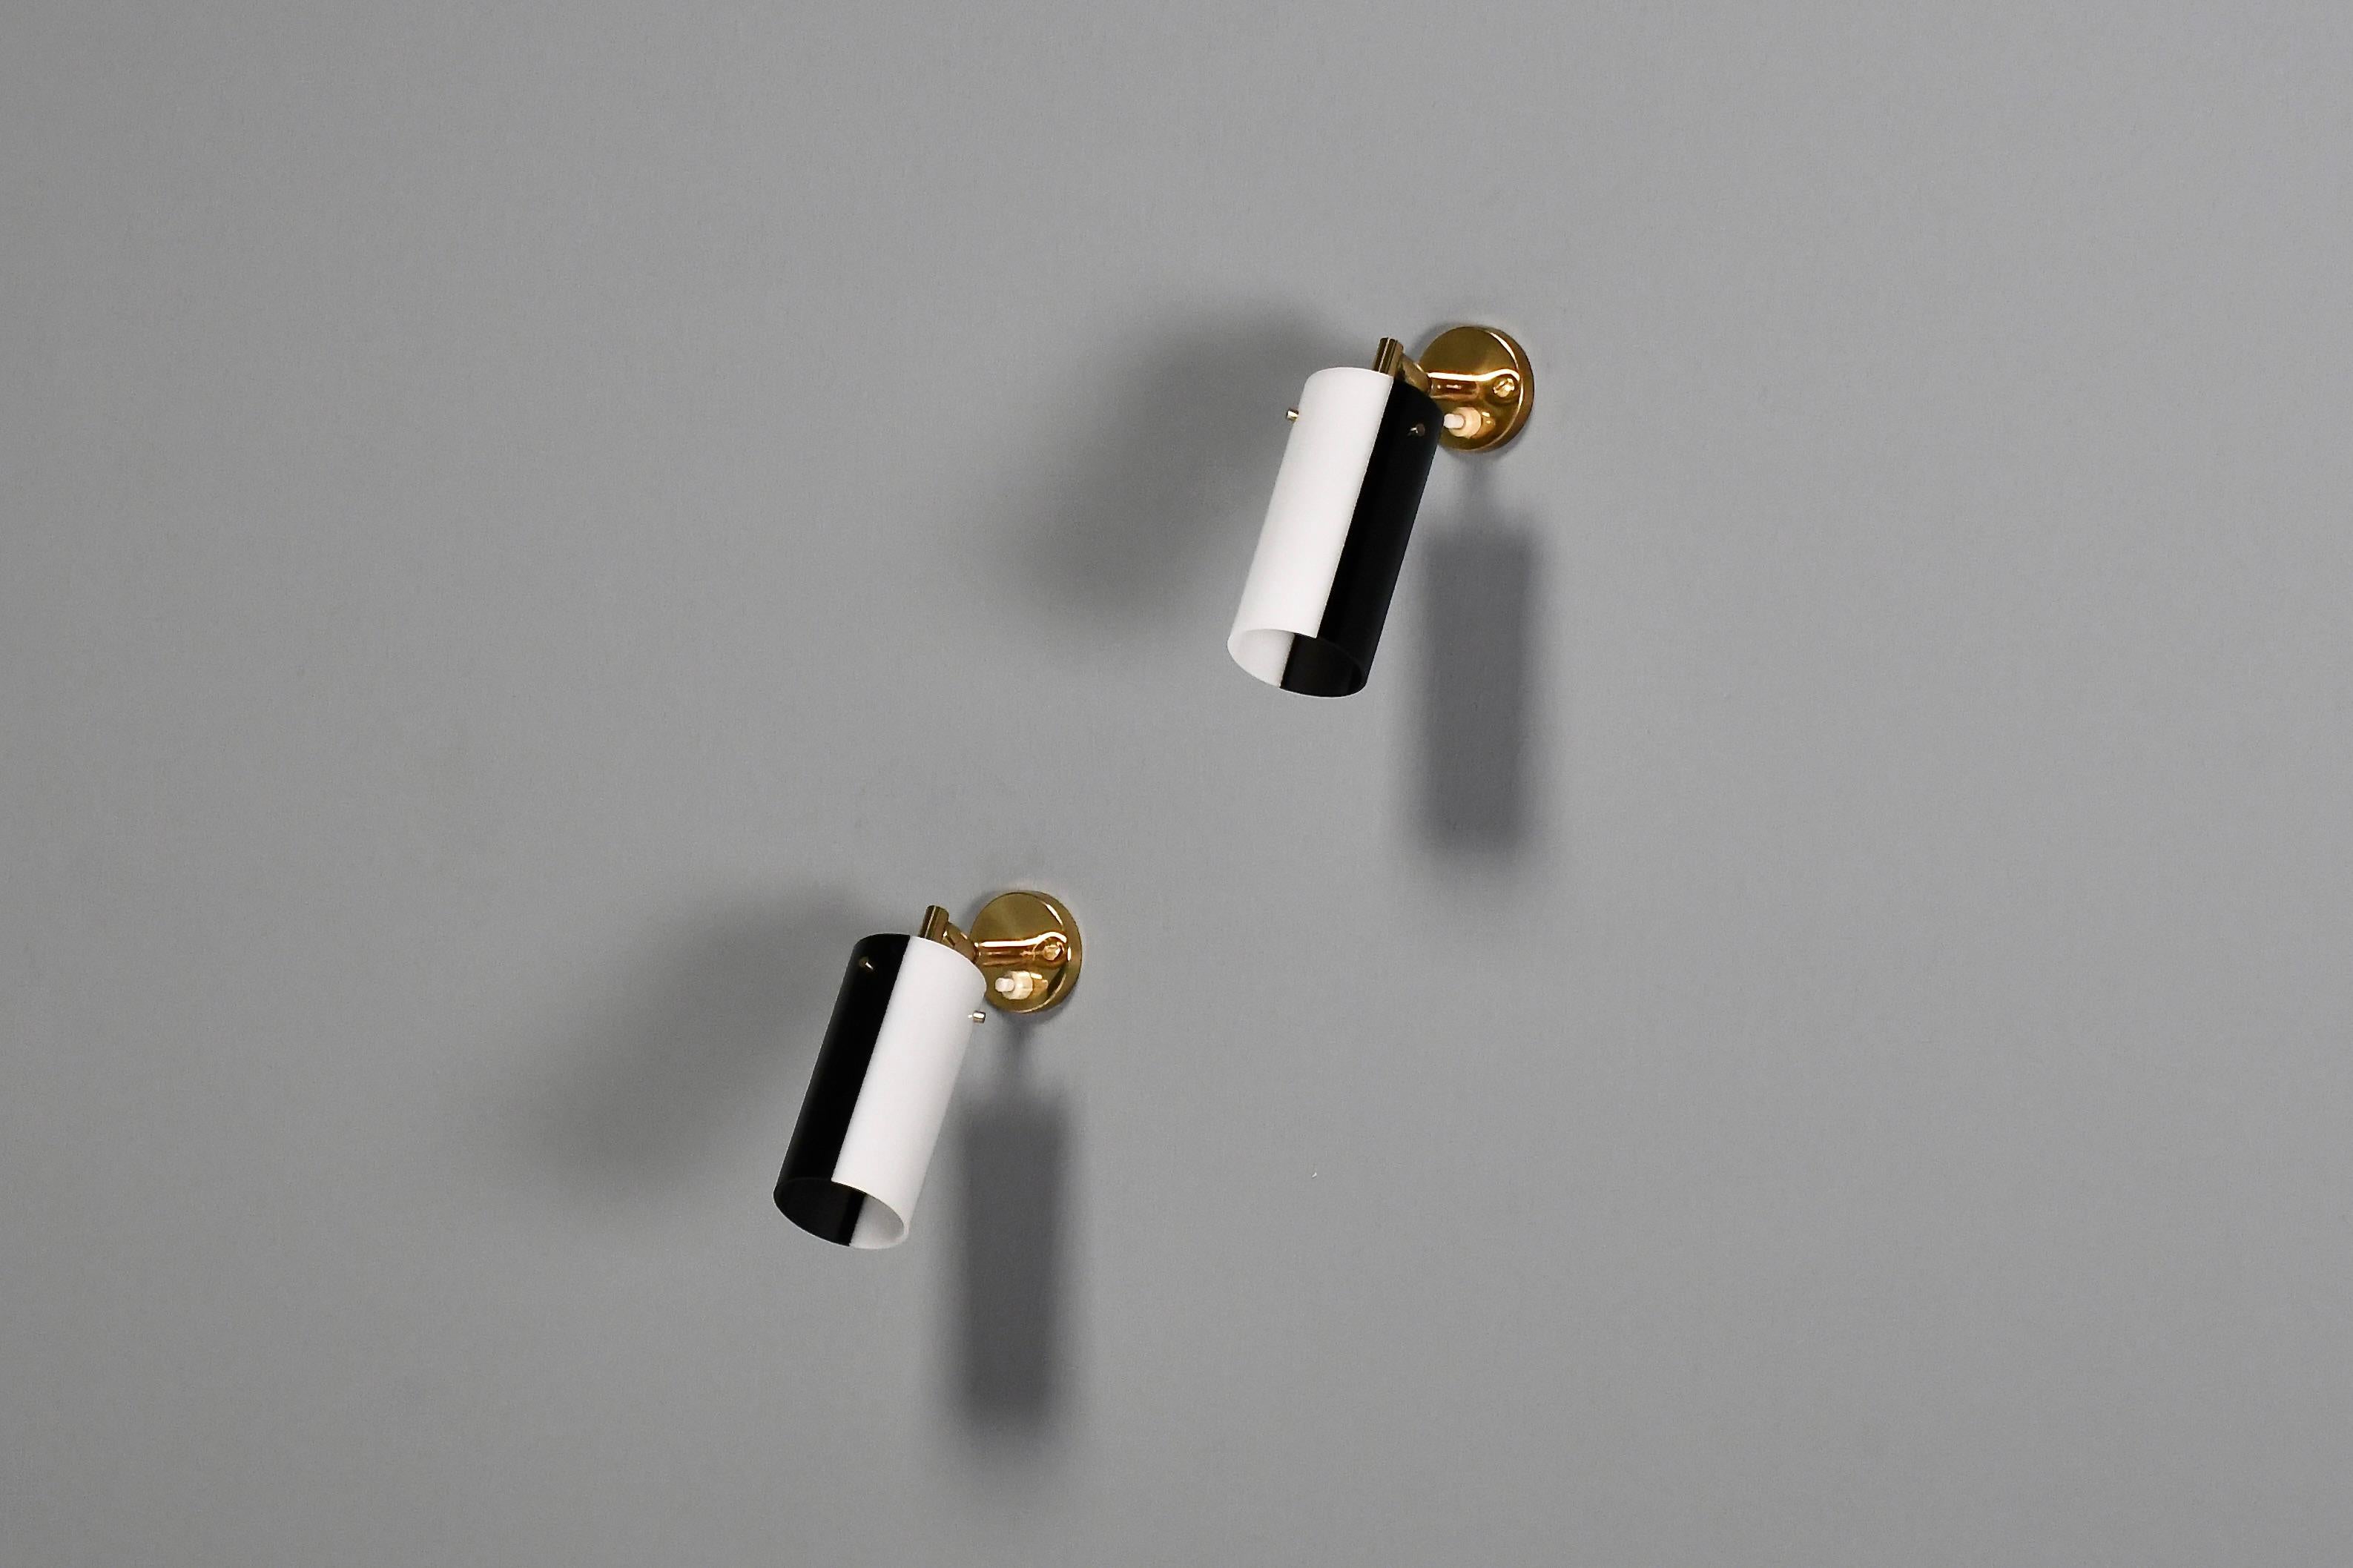 Beautiful Italian sconces in very good condition.

Designed and manufactured by Stilux in the 1960s 

Three available, price per piece.

These lamps have a perspex (acrylic) shade in black and white, the shades can rotate allowing you to customize